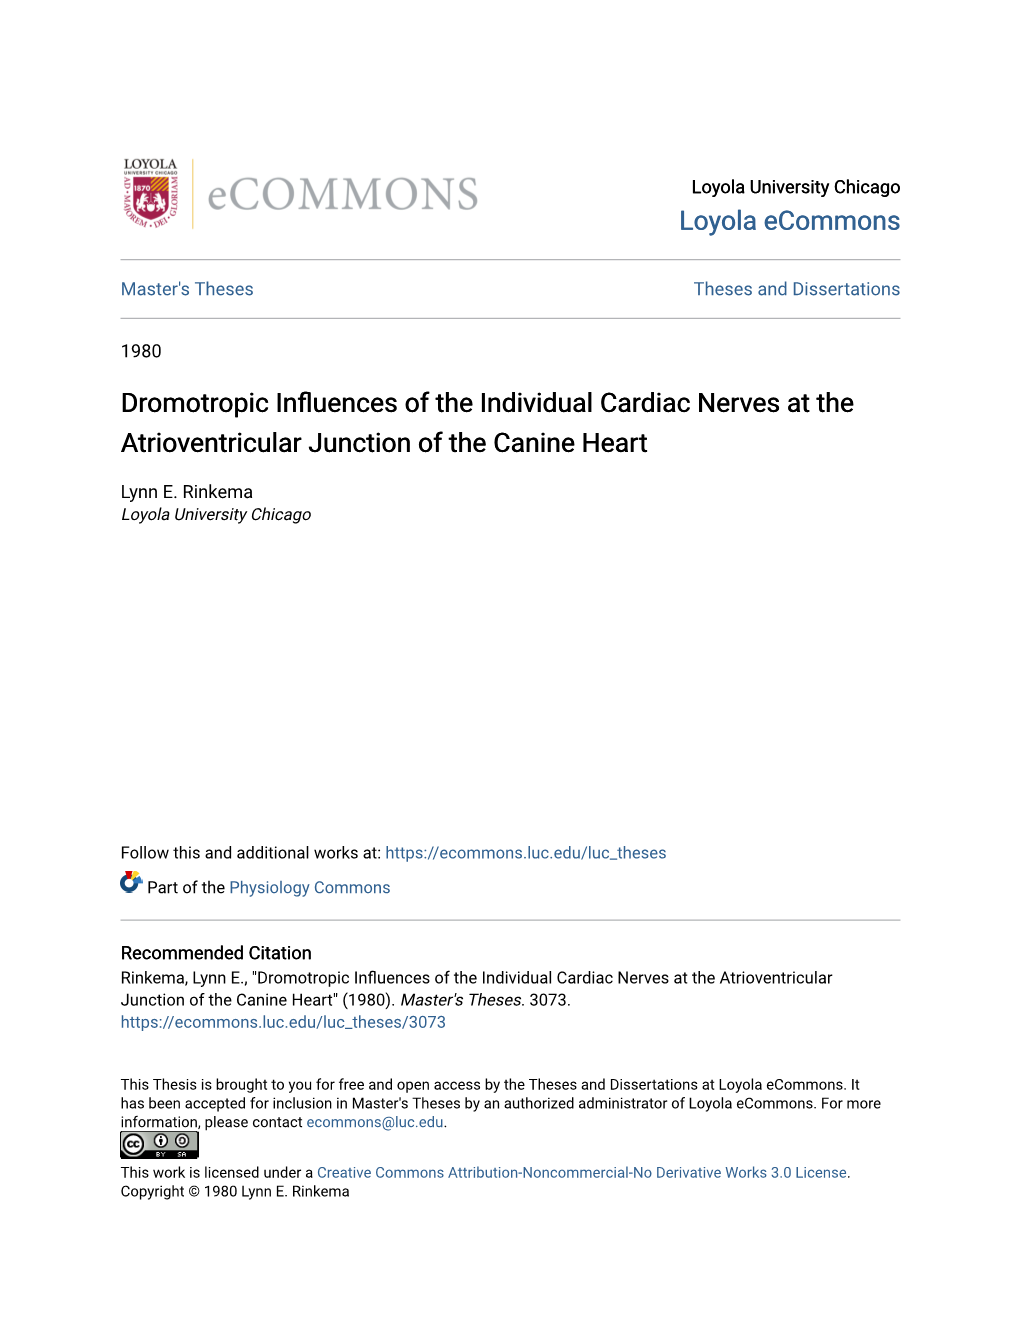 Dromotropic Influences of the Individual Cardiac Nerves at the Atrioventricular Junction of the Canine Heart